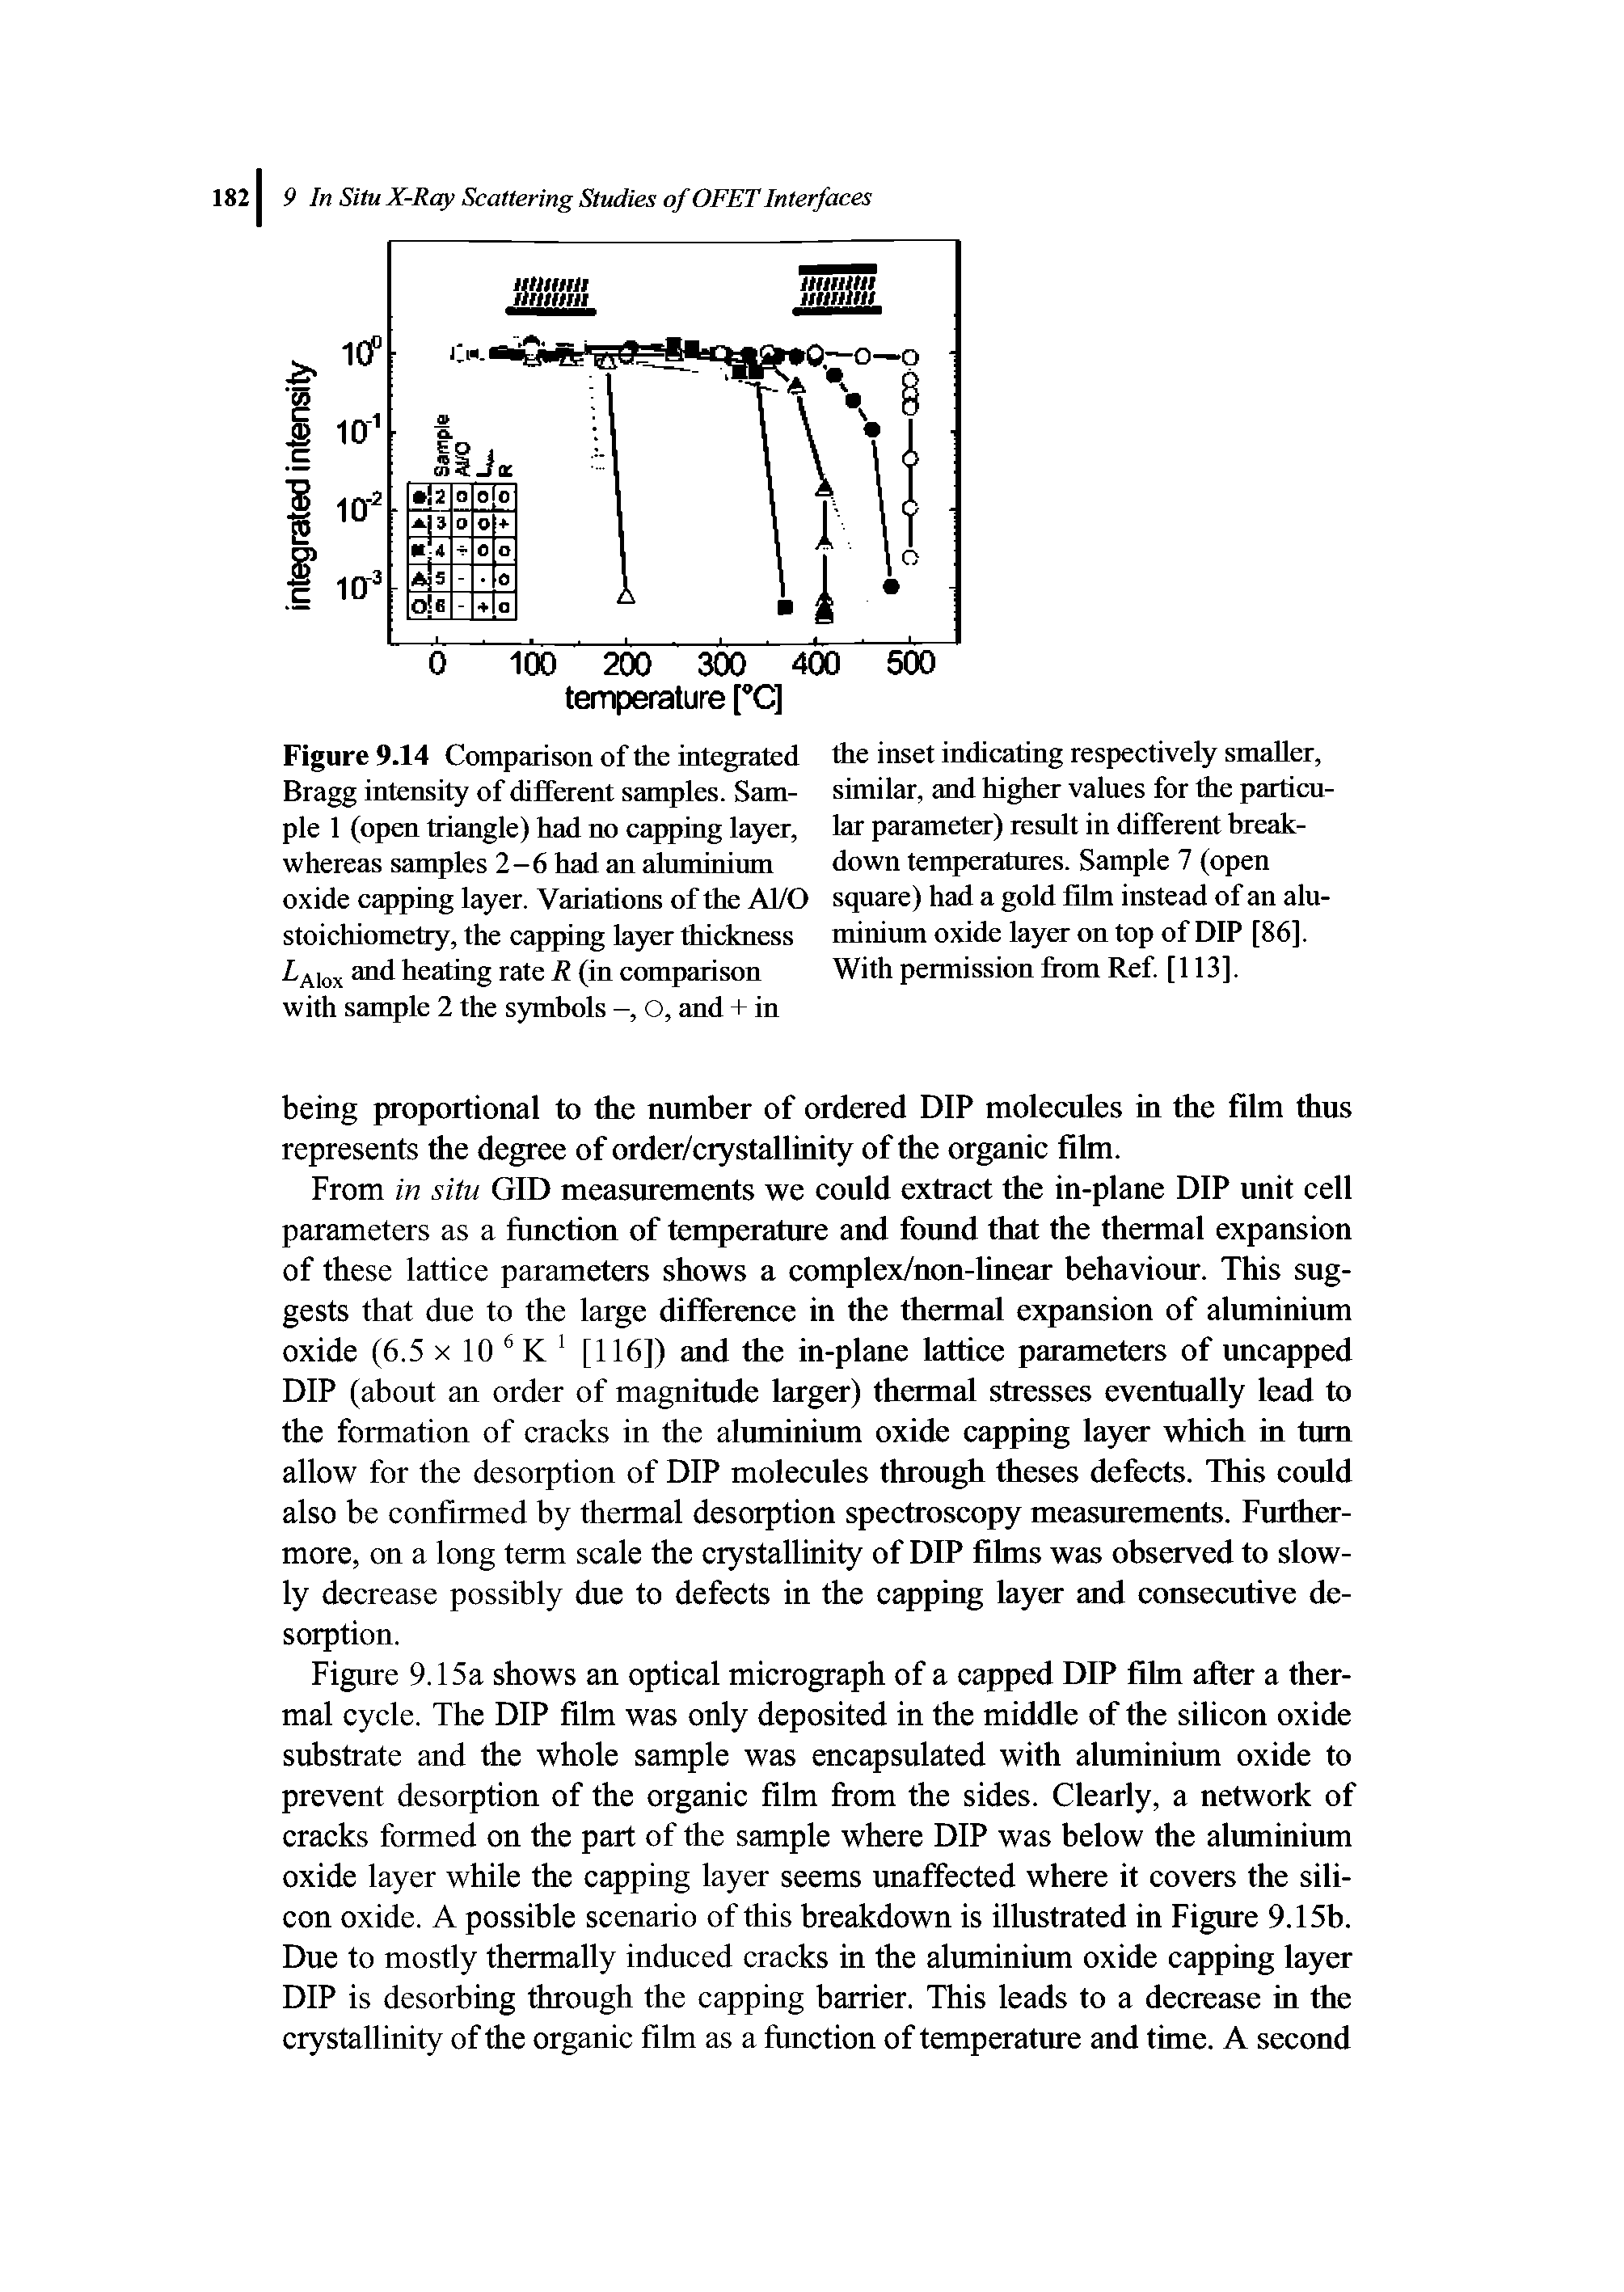 Figure 9.14 Comparison of the integrated Bragg intensity of different samples. Sample 1 (open triangle) had no capping layer, whereas samples 2-6 had an aluminium oxide capping layer. Variations of the Al/O stoichiometry, the capping layer thickness Laiox heating rate R (in comparison with sample 2 the symbols -, O, and + in...